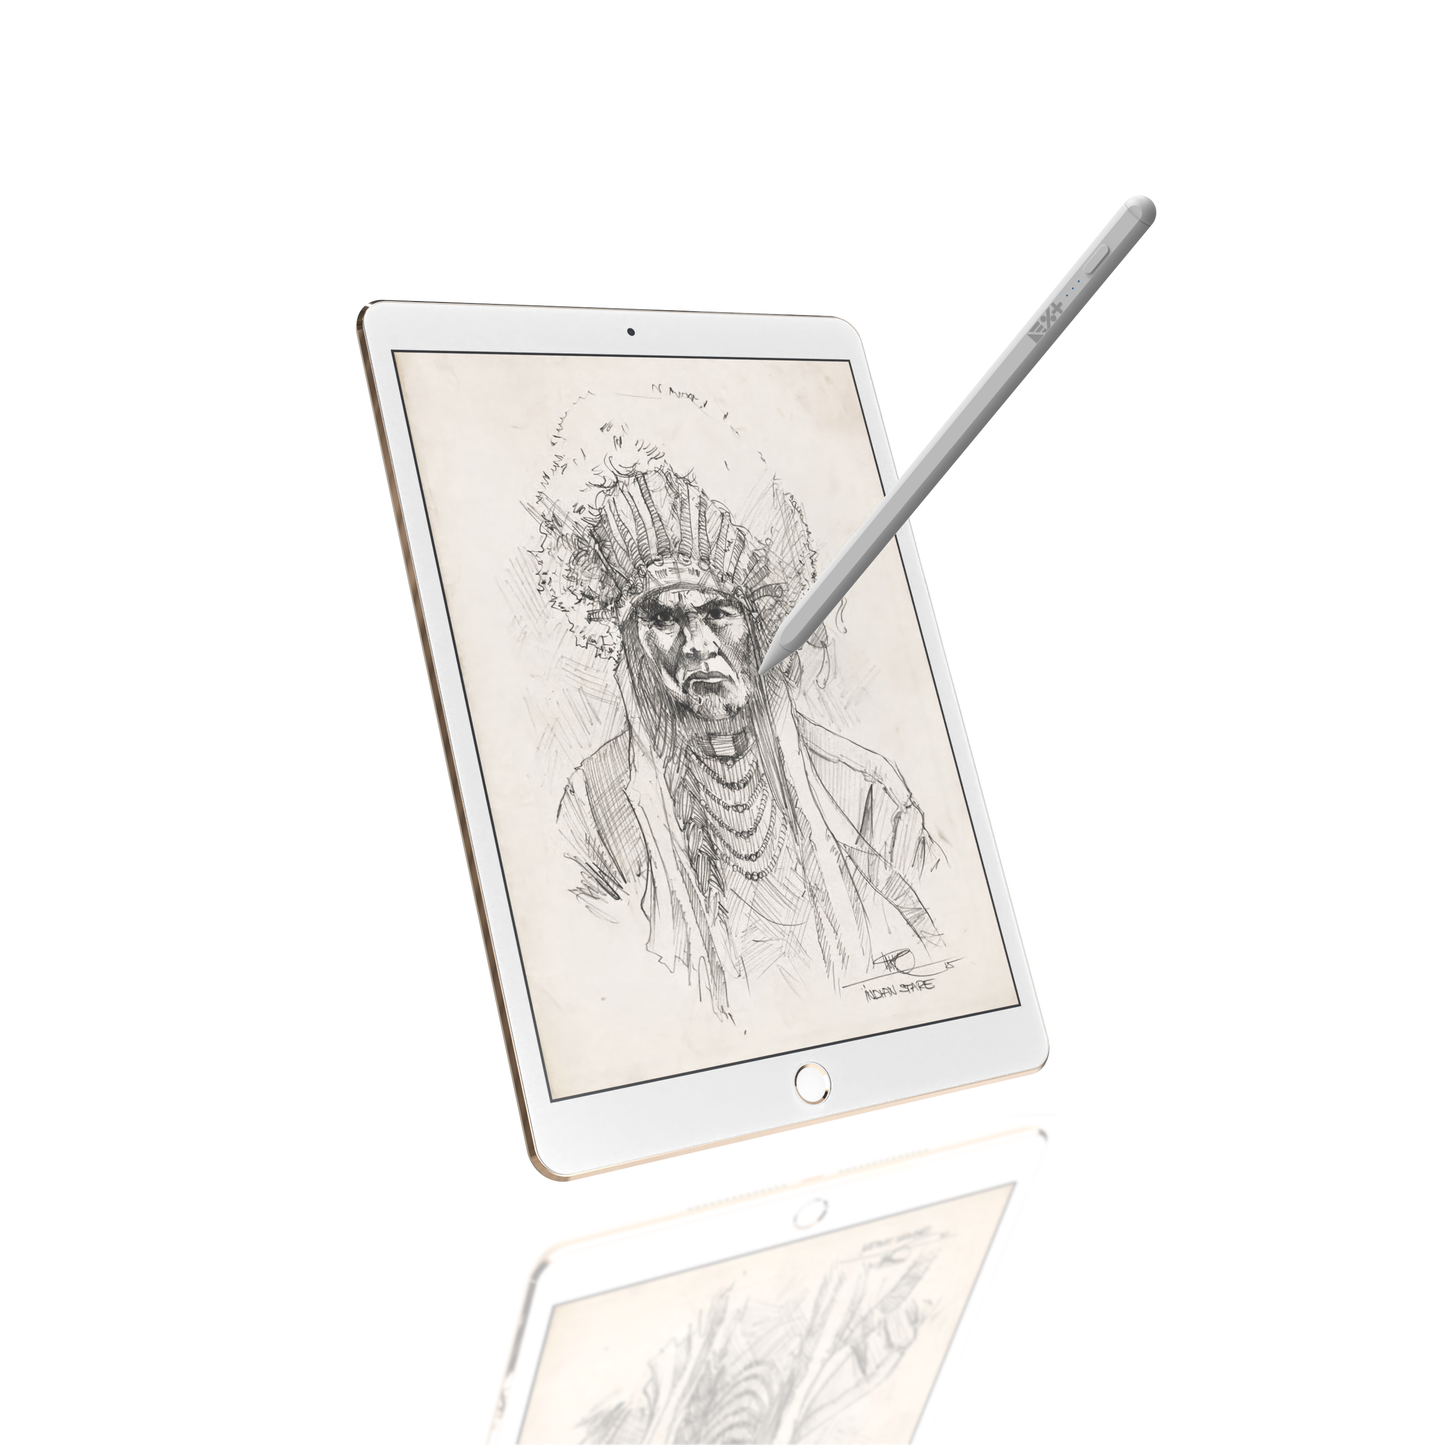 NEXT.ONE Scribble Paper Screen Protector - iPad 10.2" (2021)